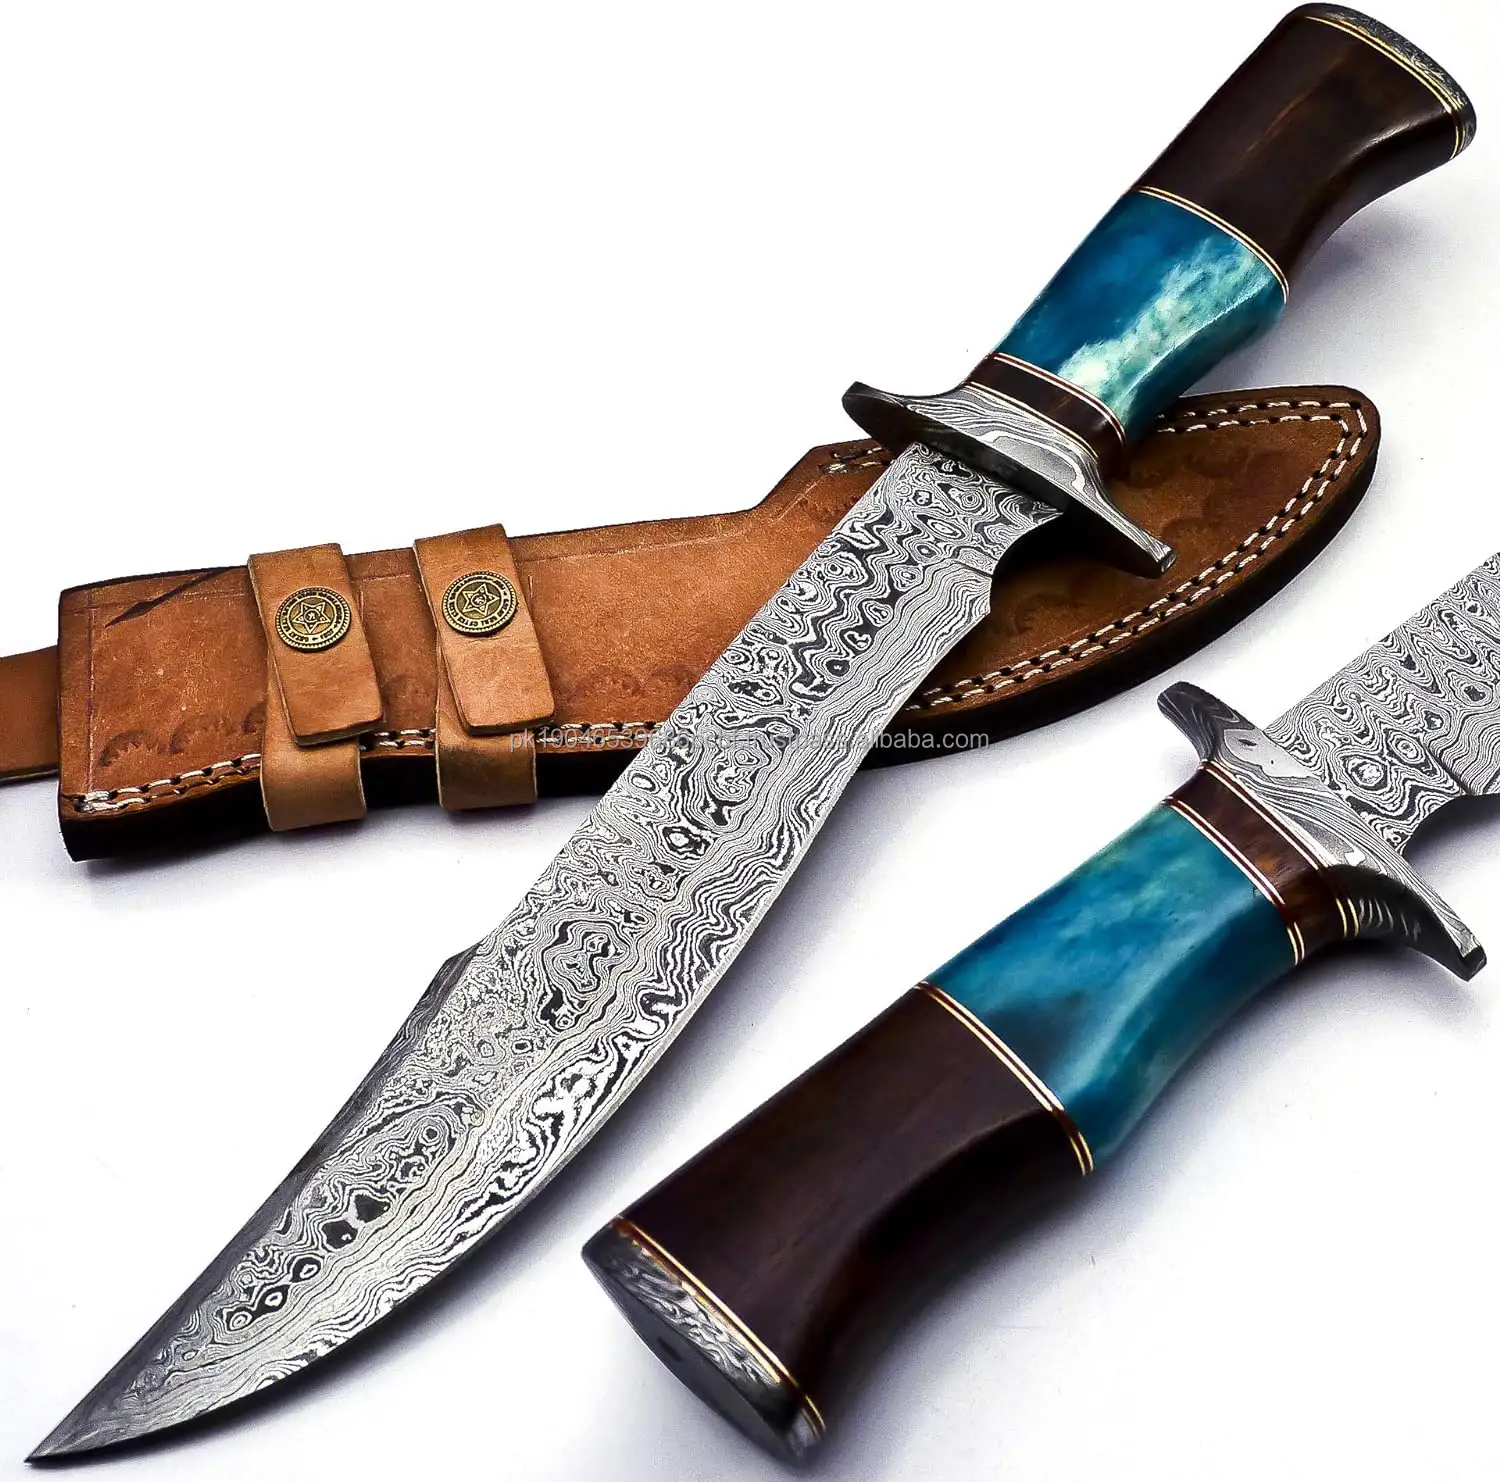 Handmade Damascus Steel Fixed Blade Bowie Knife Full Tang Multipurpose Knife with Wood and Bone Handle for Outdoor Use W/Sheath